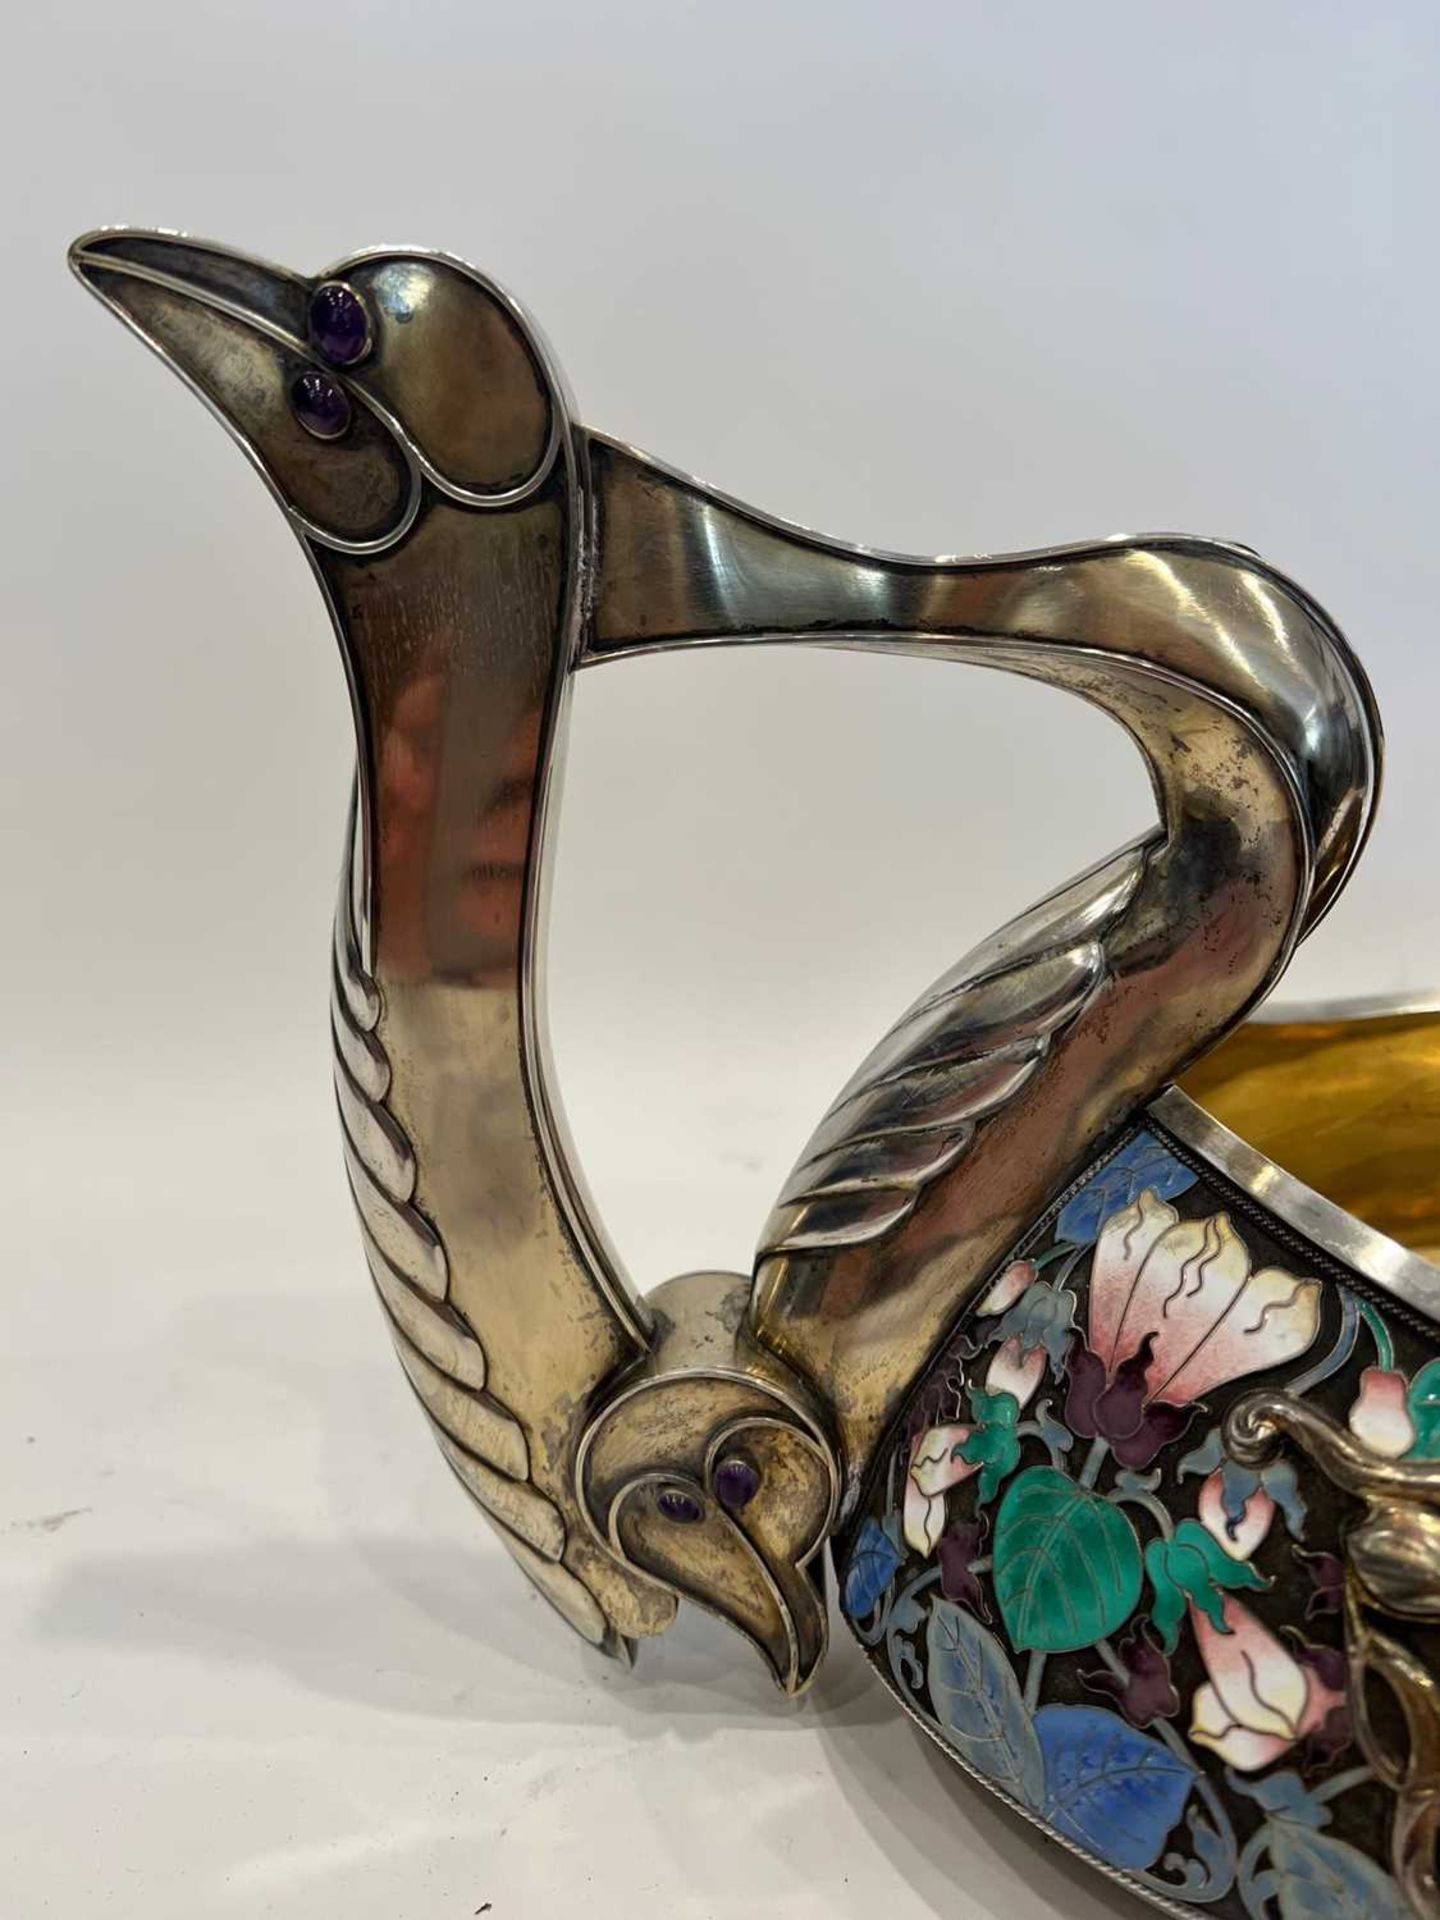 A MASSIVE EARLY 20TH CENTURY RUSSIAN SILVER AND ENAMEL KOVSH IN THE FORM OF A SWAN - Image 20 of 28